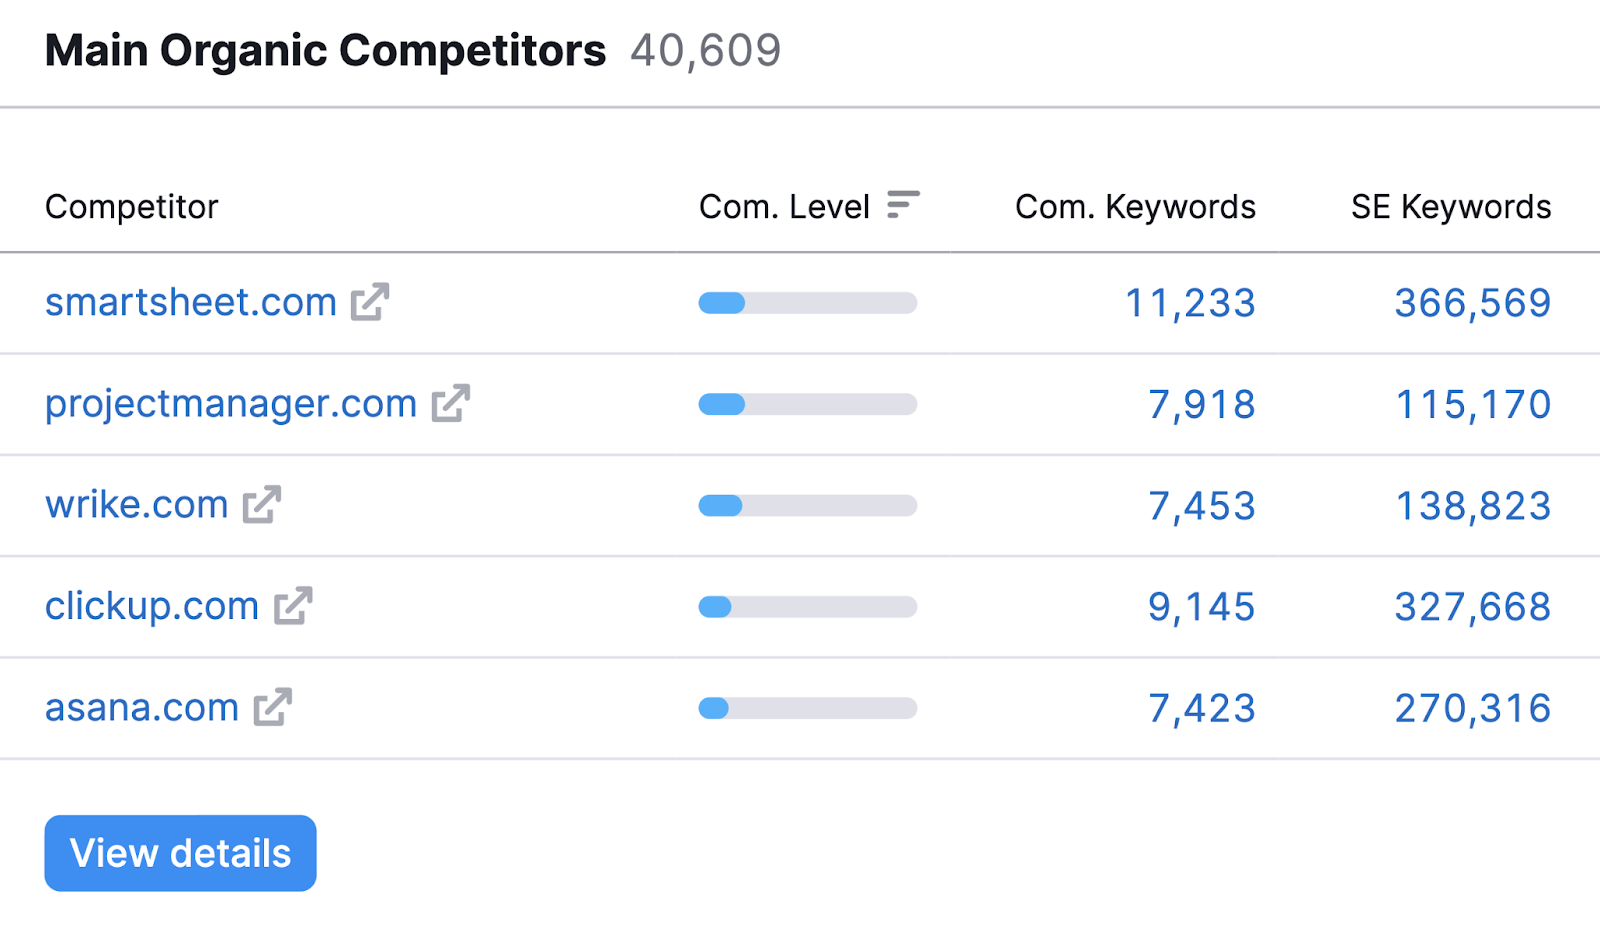 “Main Organic Competitors” section in Domain Overview tool